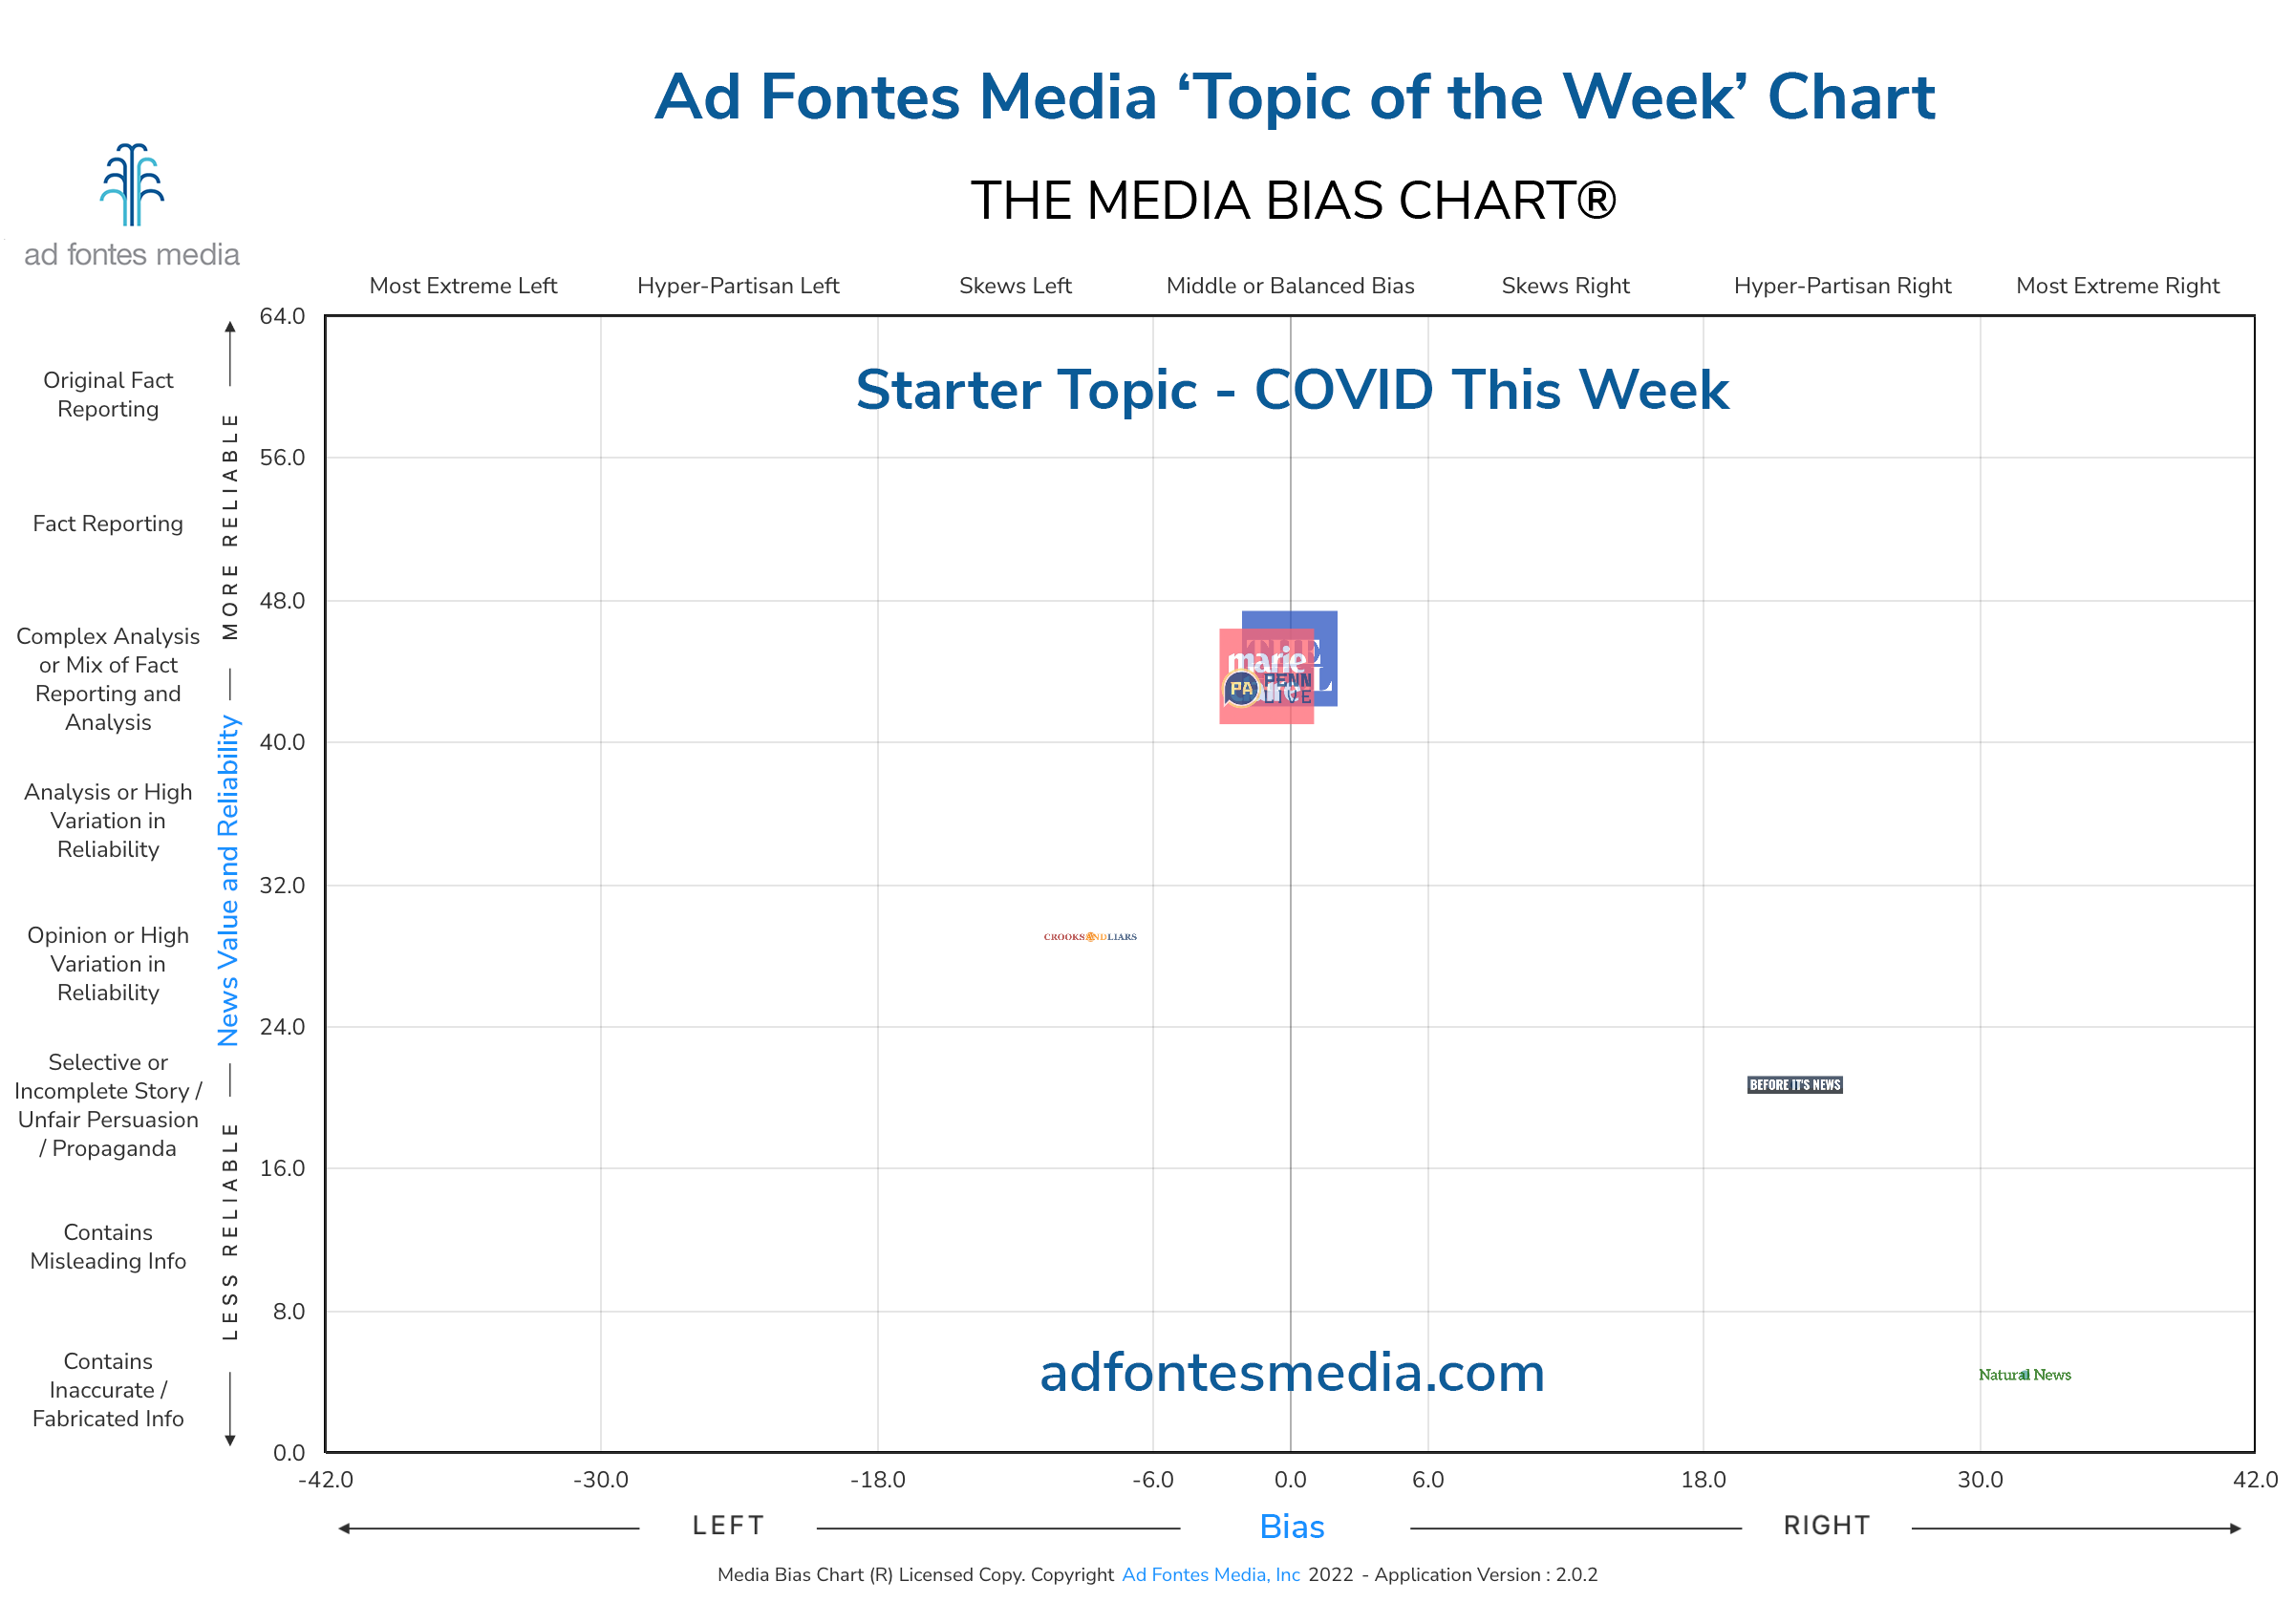 Scores for Covid This Week articles on the chart